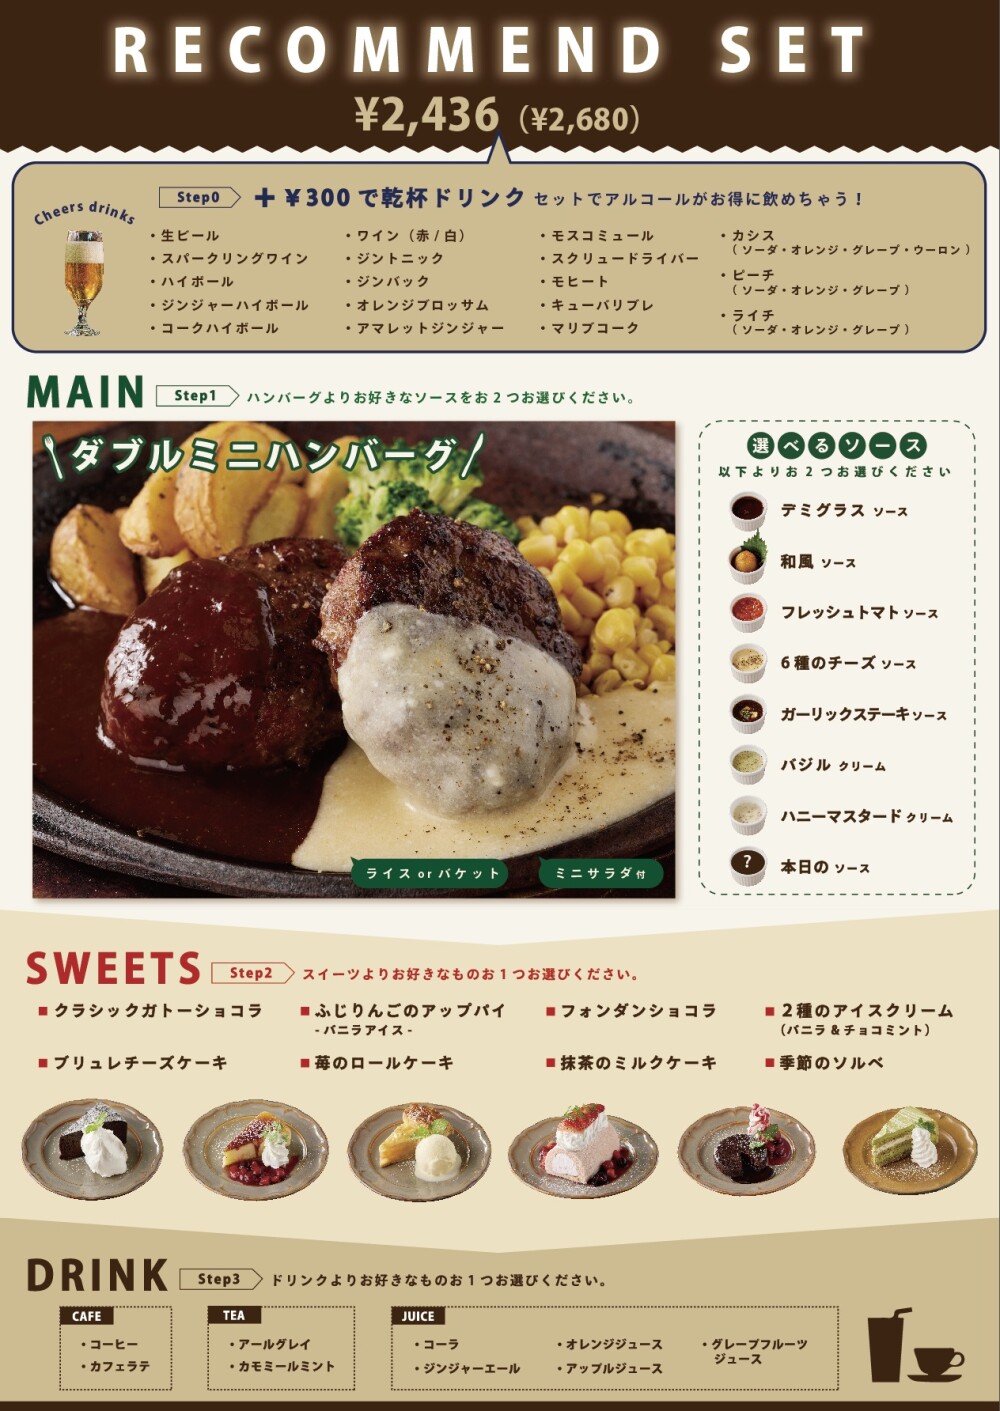 【７F　Cafe&Grill SIZZLE GAZZLE】セットメニューが更にお得に！！